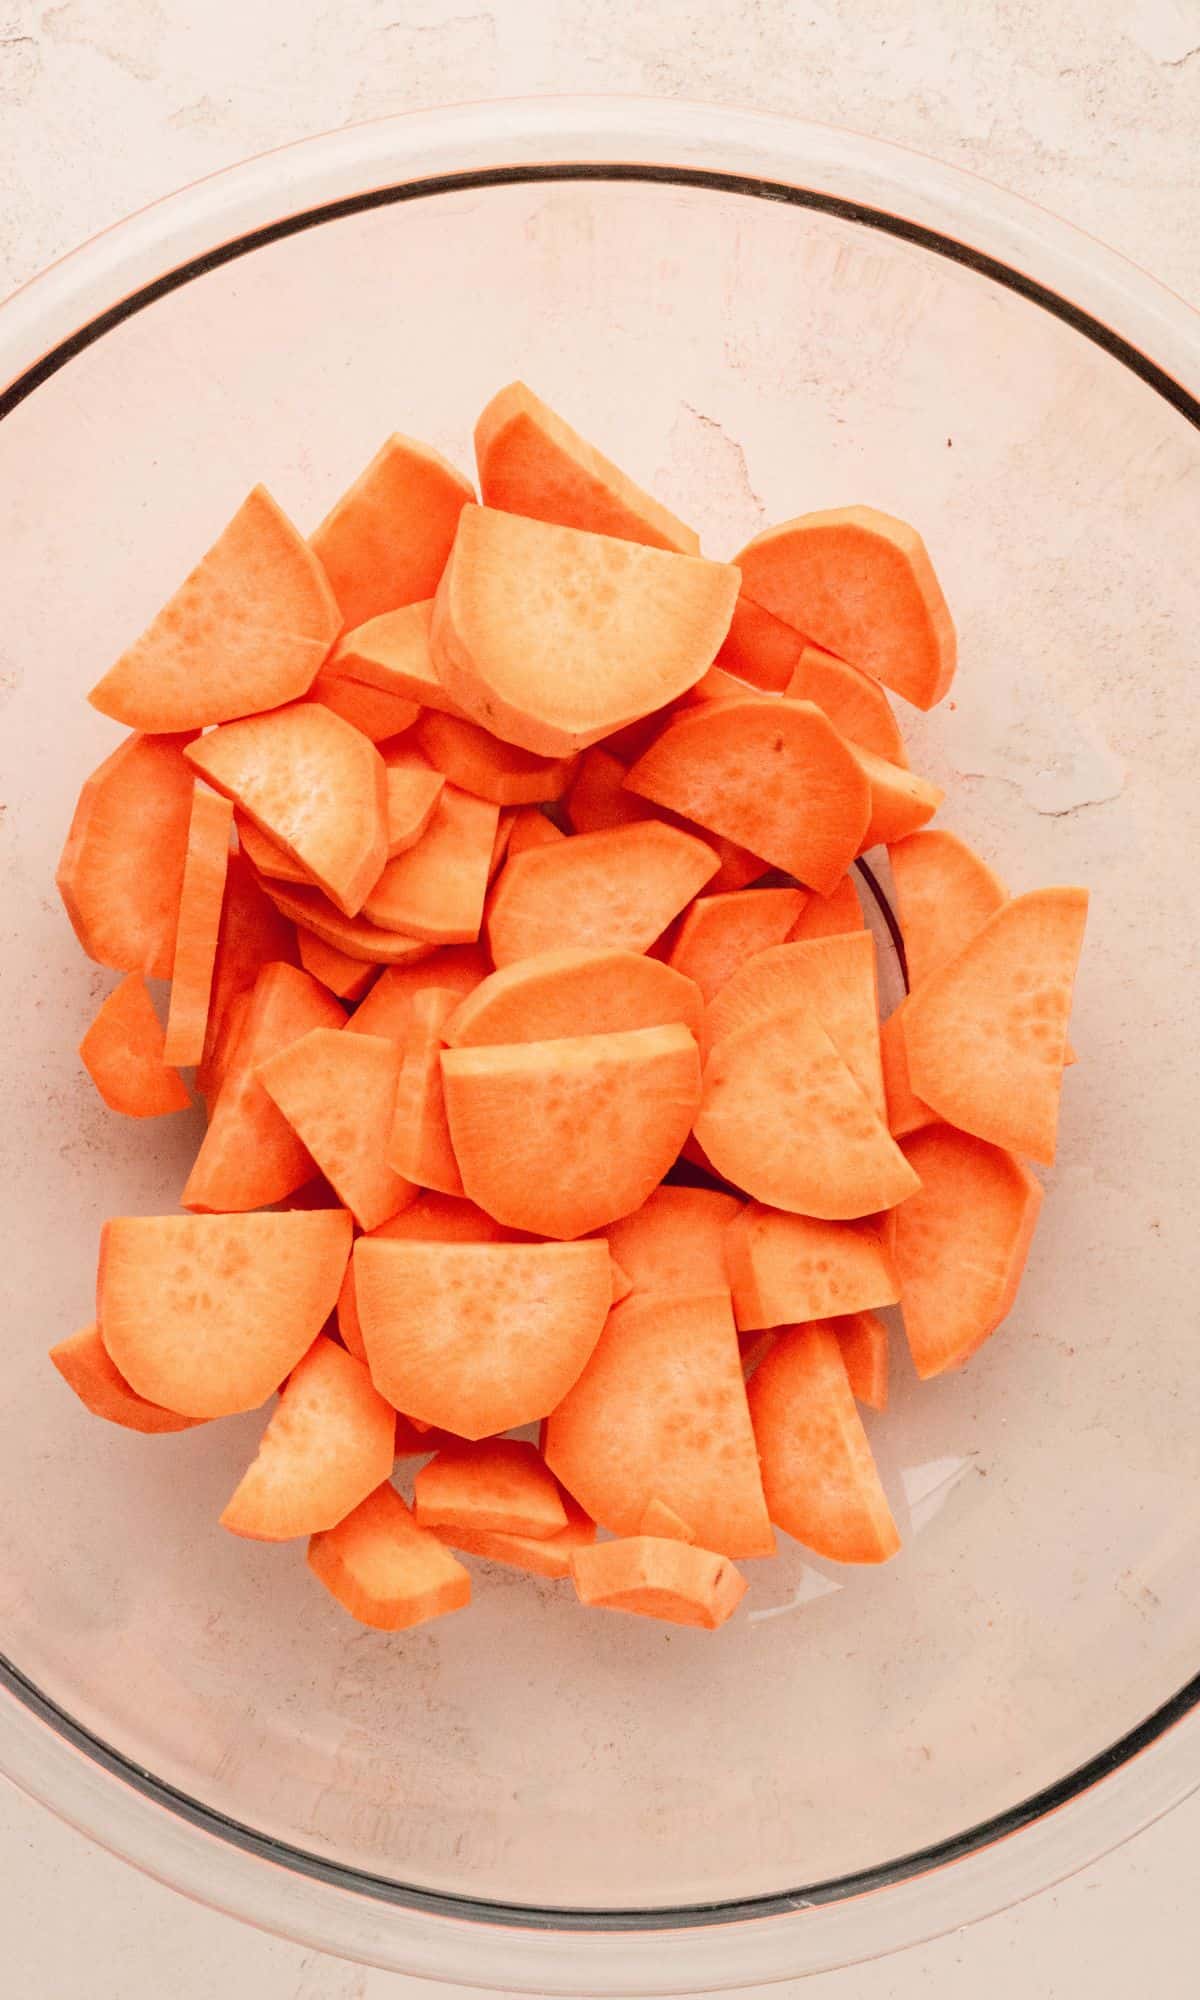 Sliced sweet potatoes in a glass bowl.